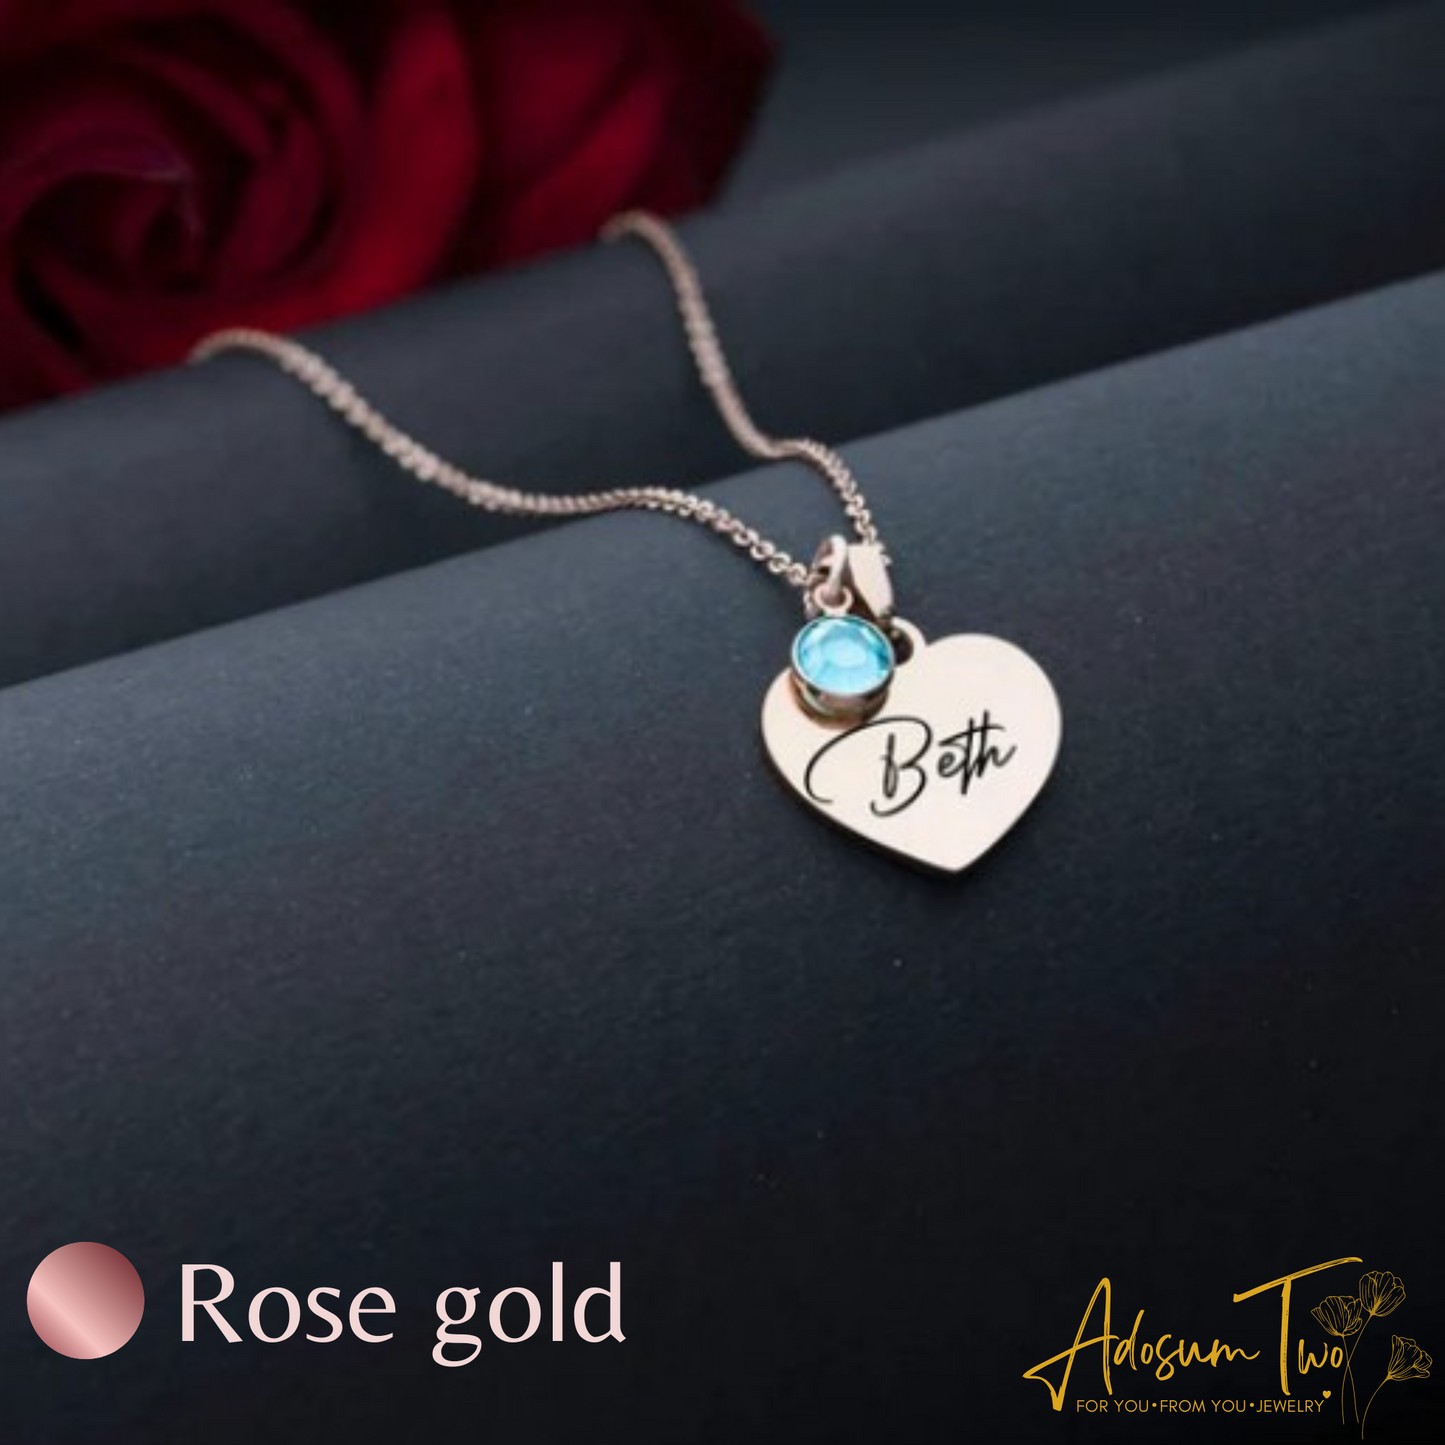 Custom Personalized Birthstone Name Engraved Necklace